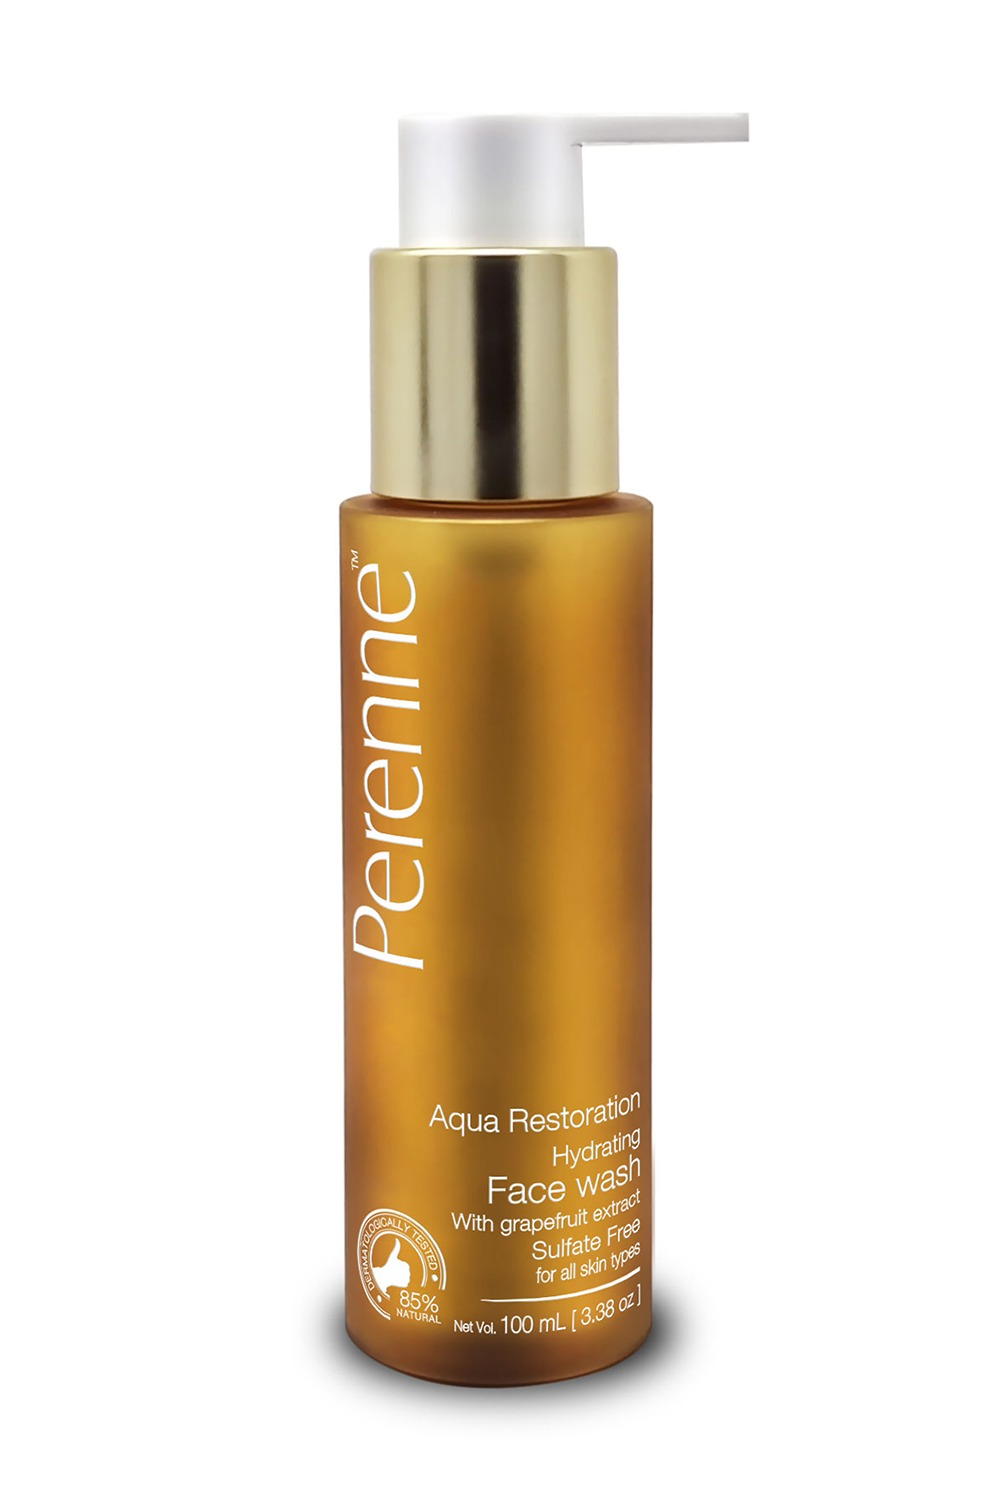 Perenne Hydrating Face Wash Sulphate Free - 100ml